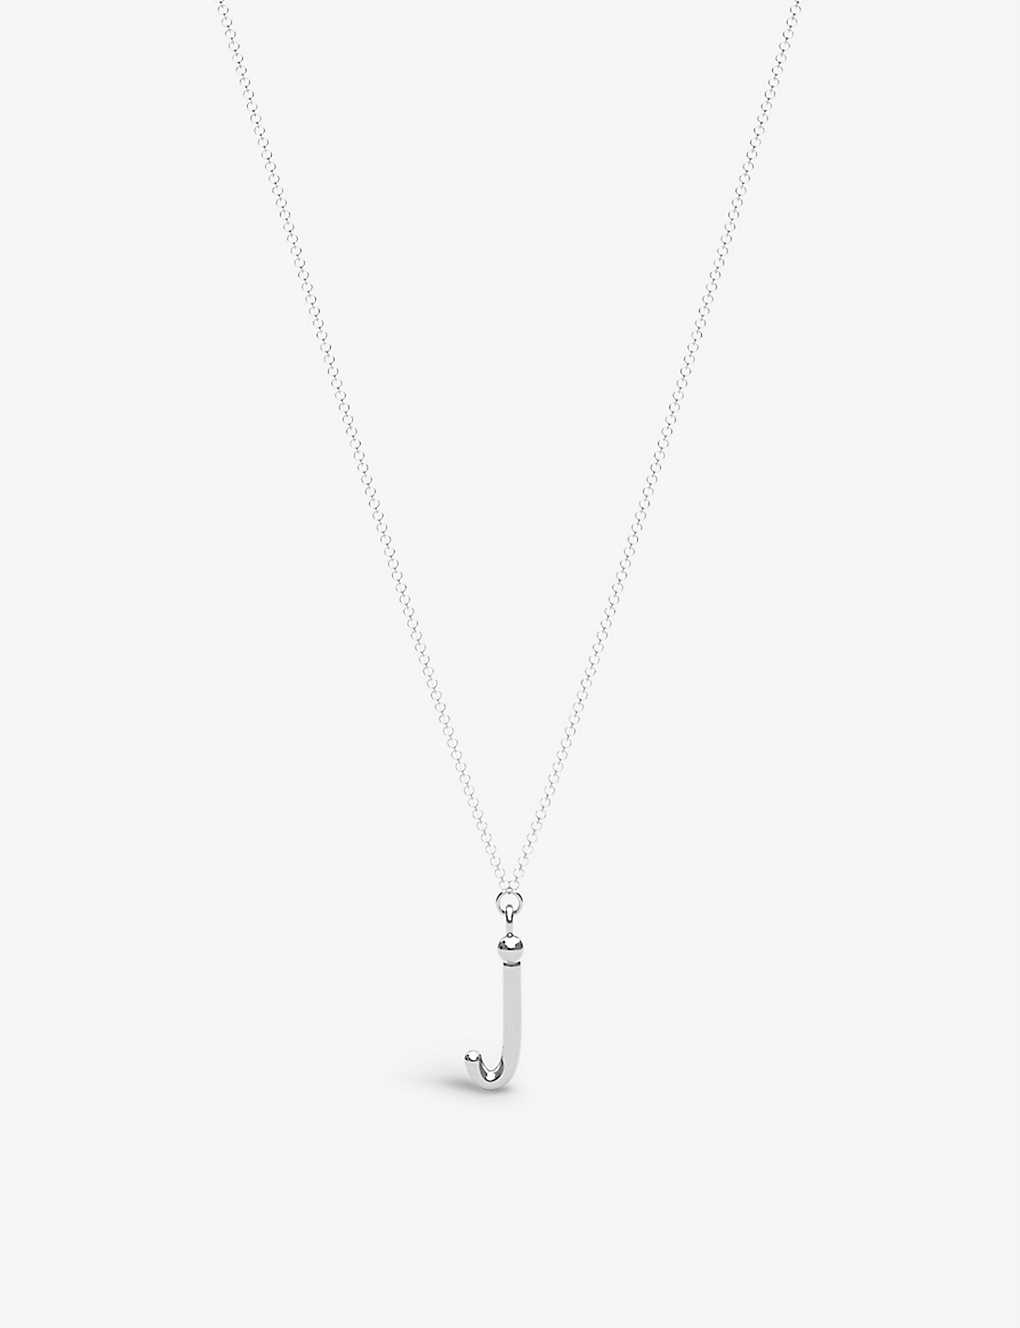 The Alkemistry Womens 18ct White Gold Love Letter J Initial 18ct White-gold Pendant Necklace